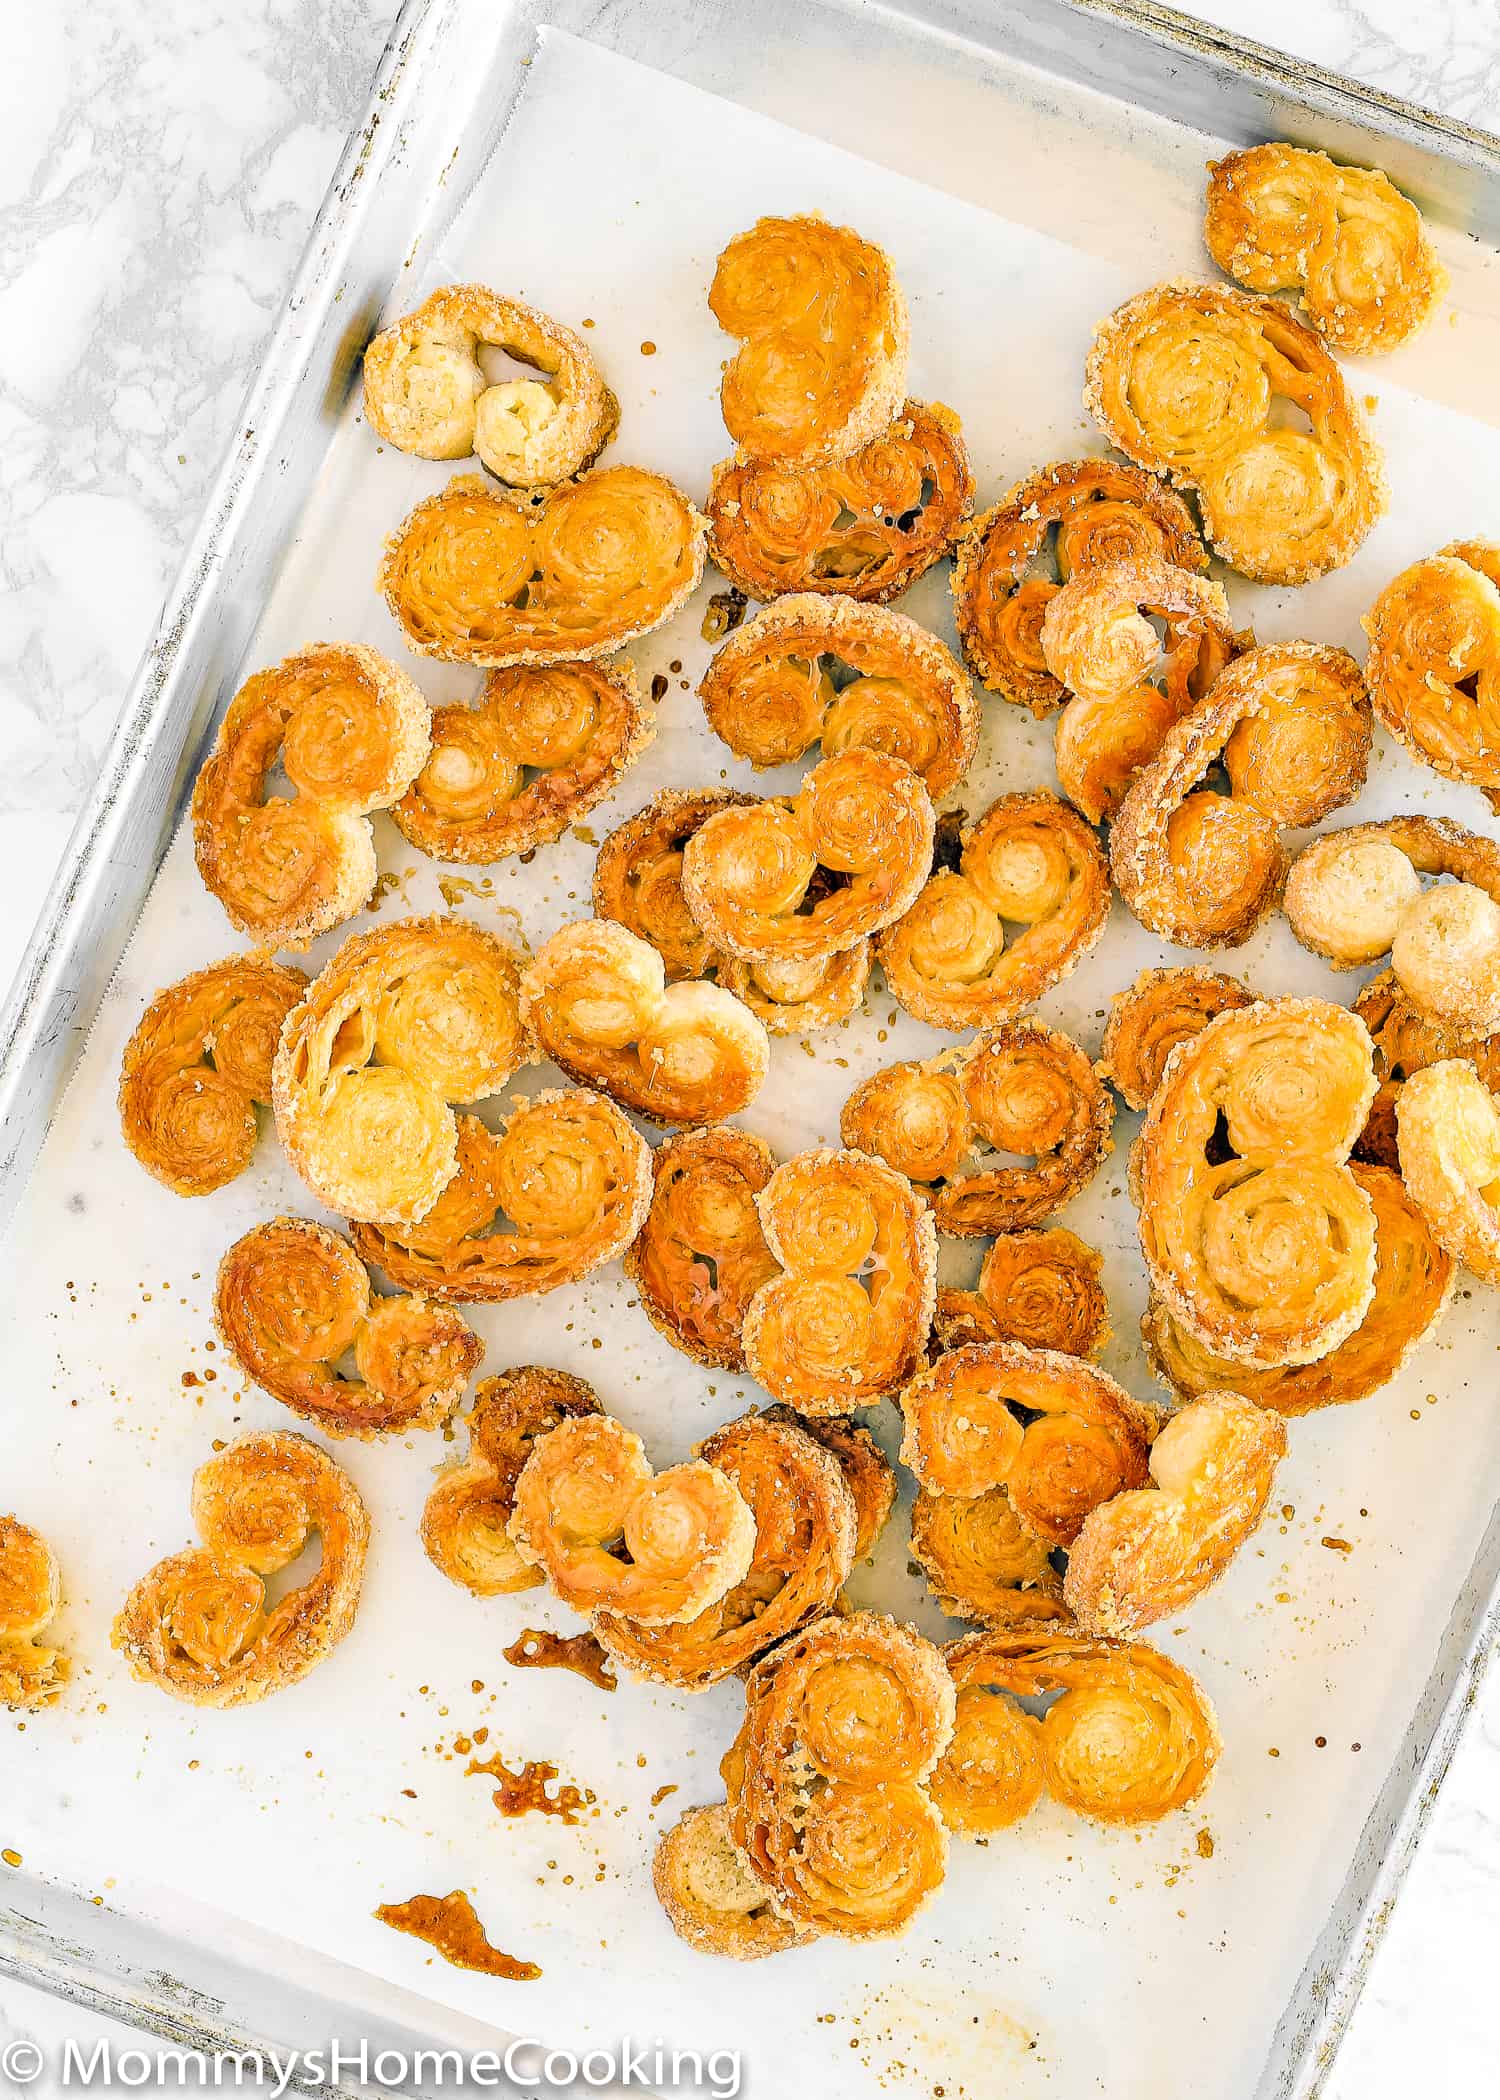 This Easy Palmiers recipe, made with just 2 ingredients, is one of my family’s all-time favorite treats! Perfect to share with family and friends during “Cafecito“ time. https://mommyshomecooking.com